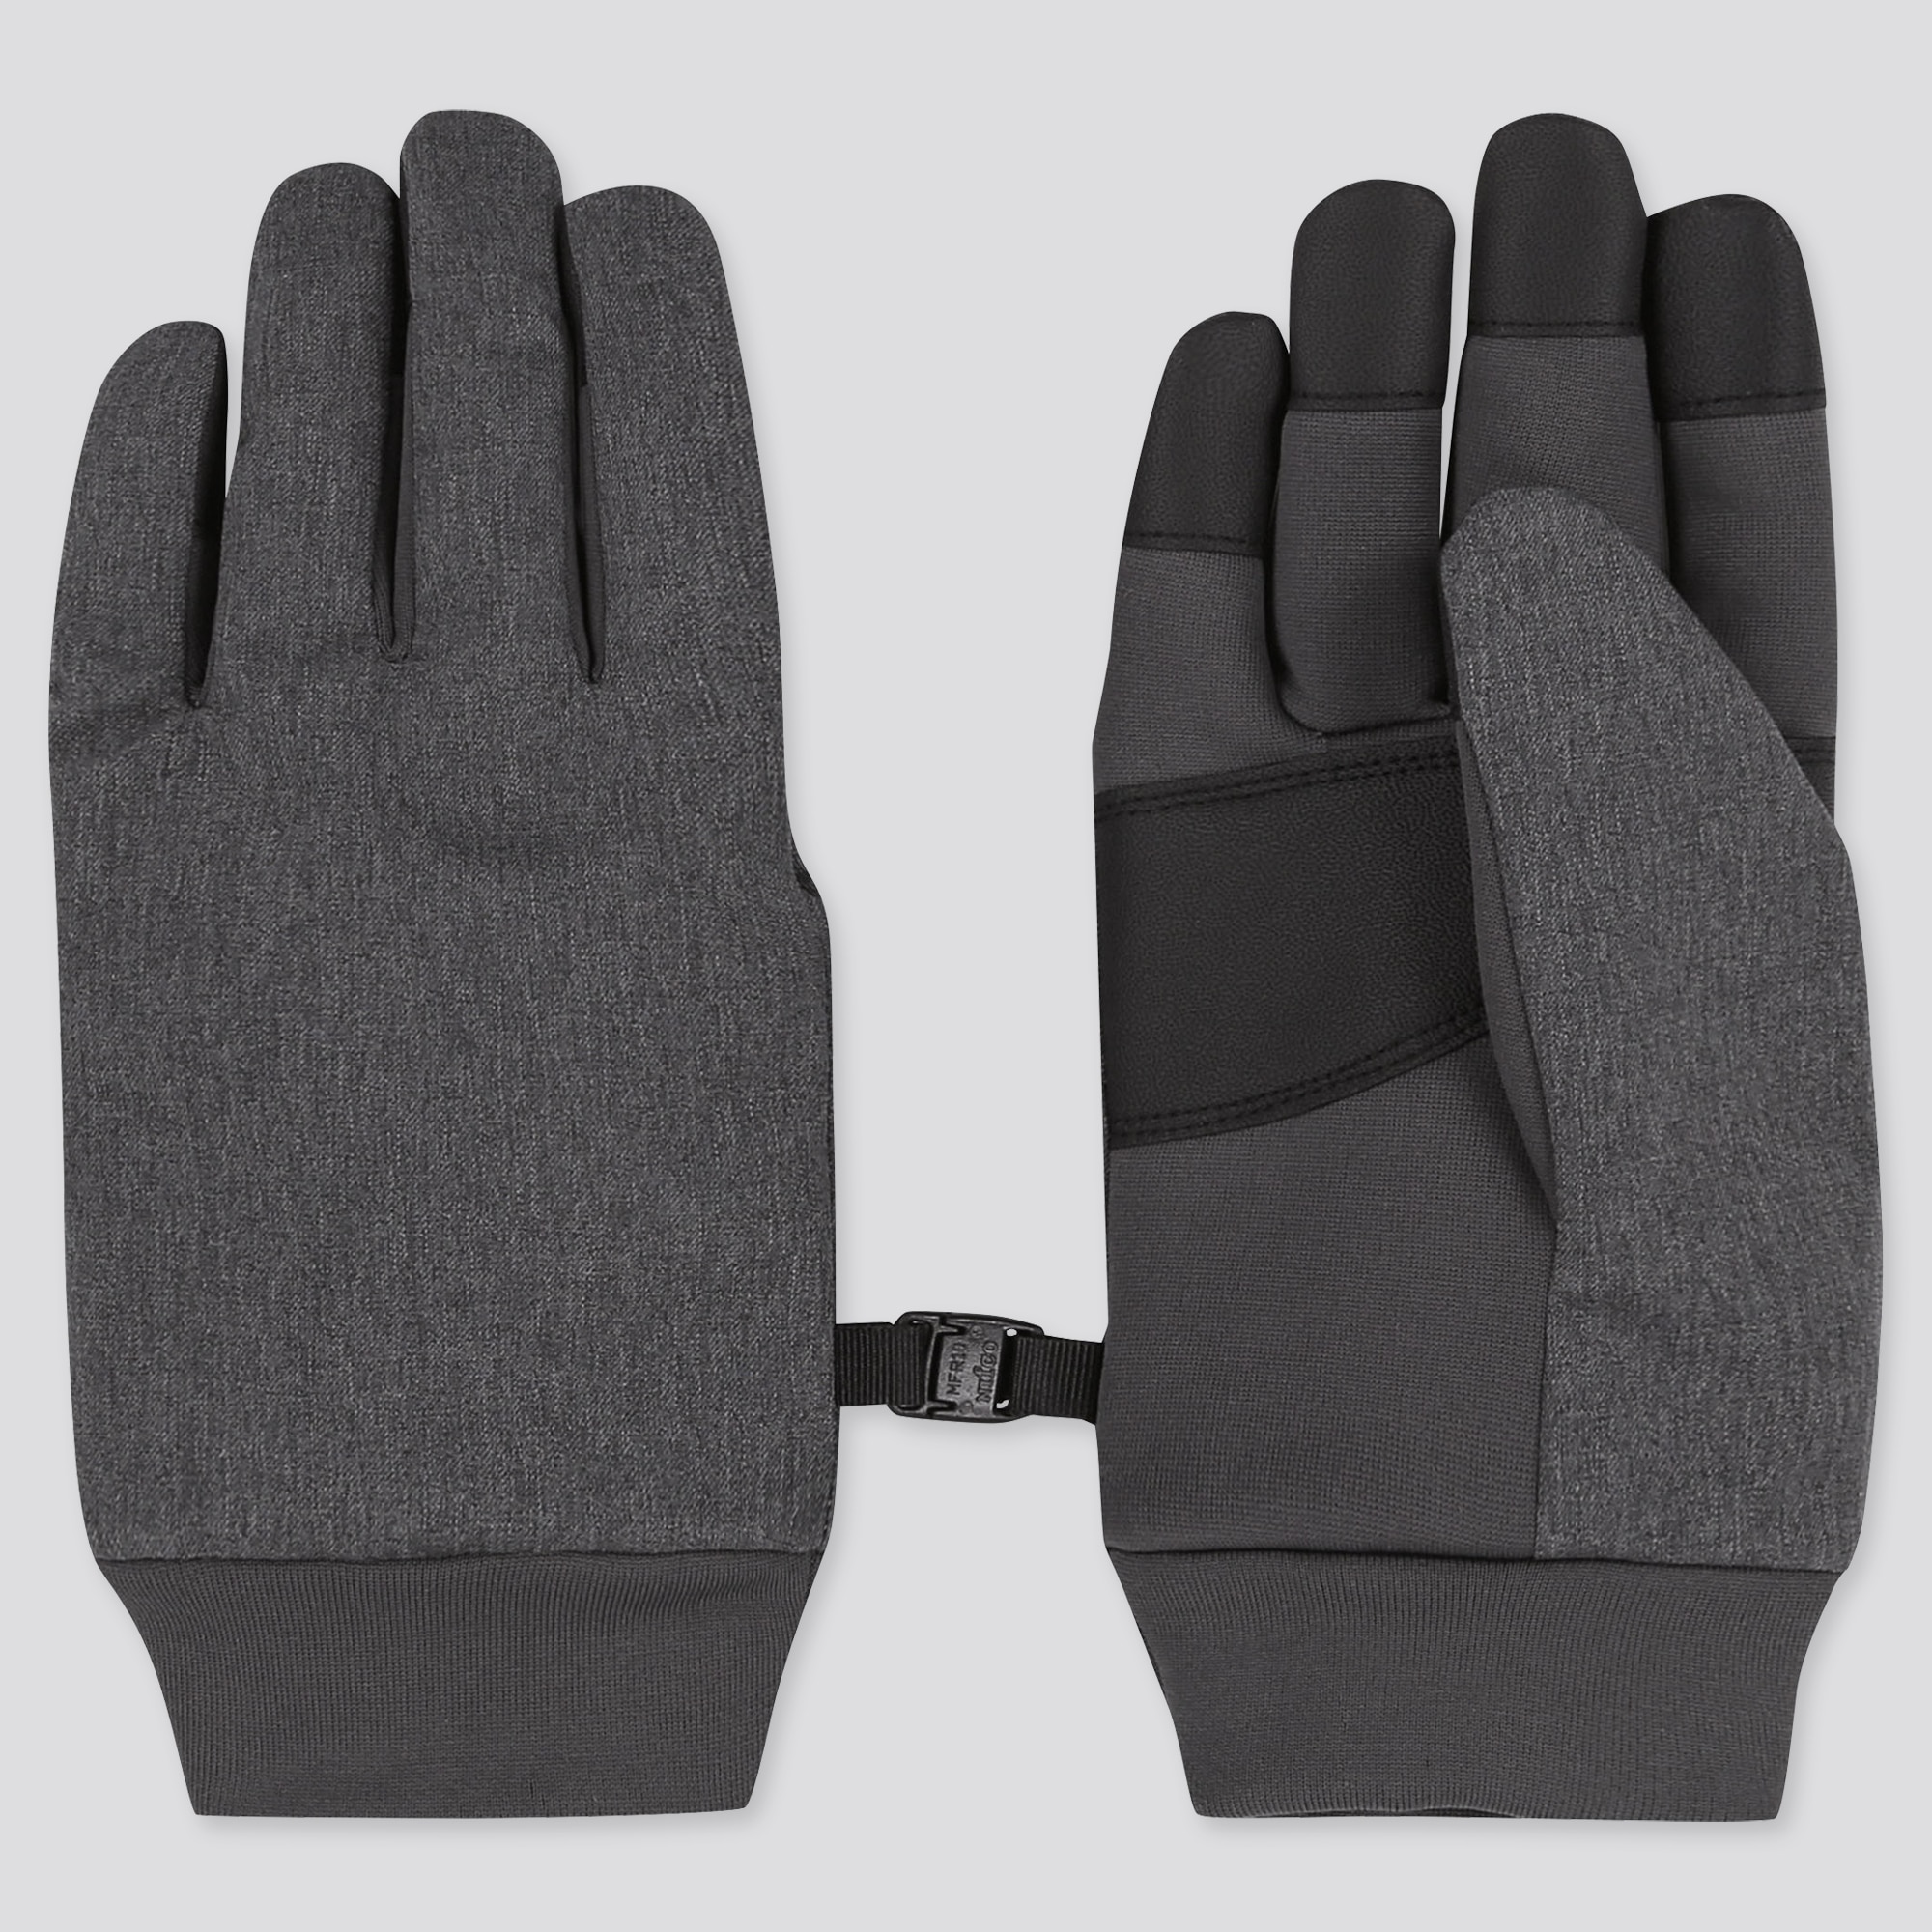 KIDS HEATTECH-LINED FUNCTION GLOVES | UNIQLO US